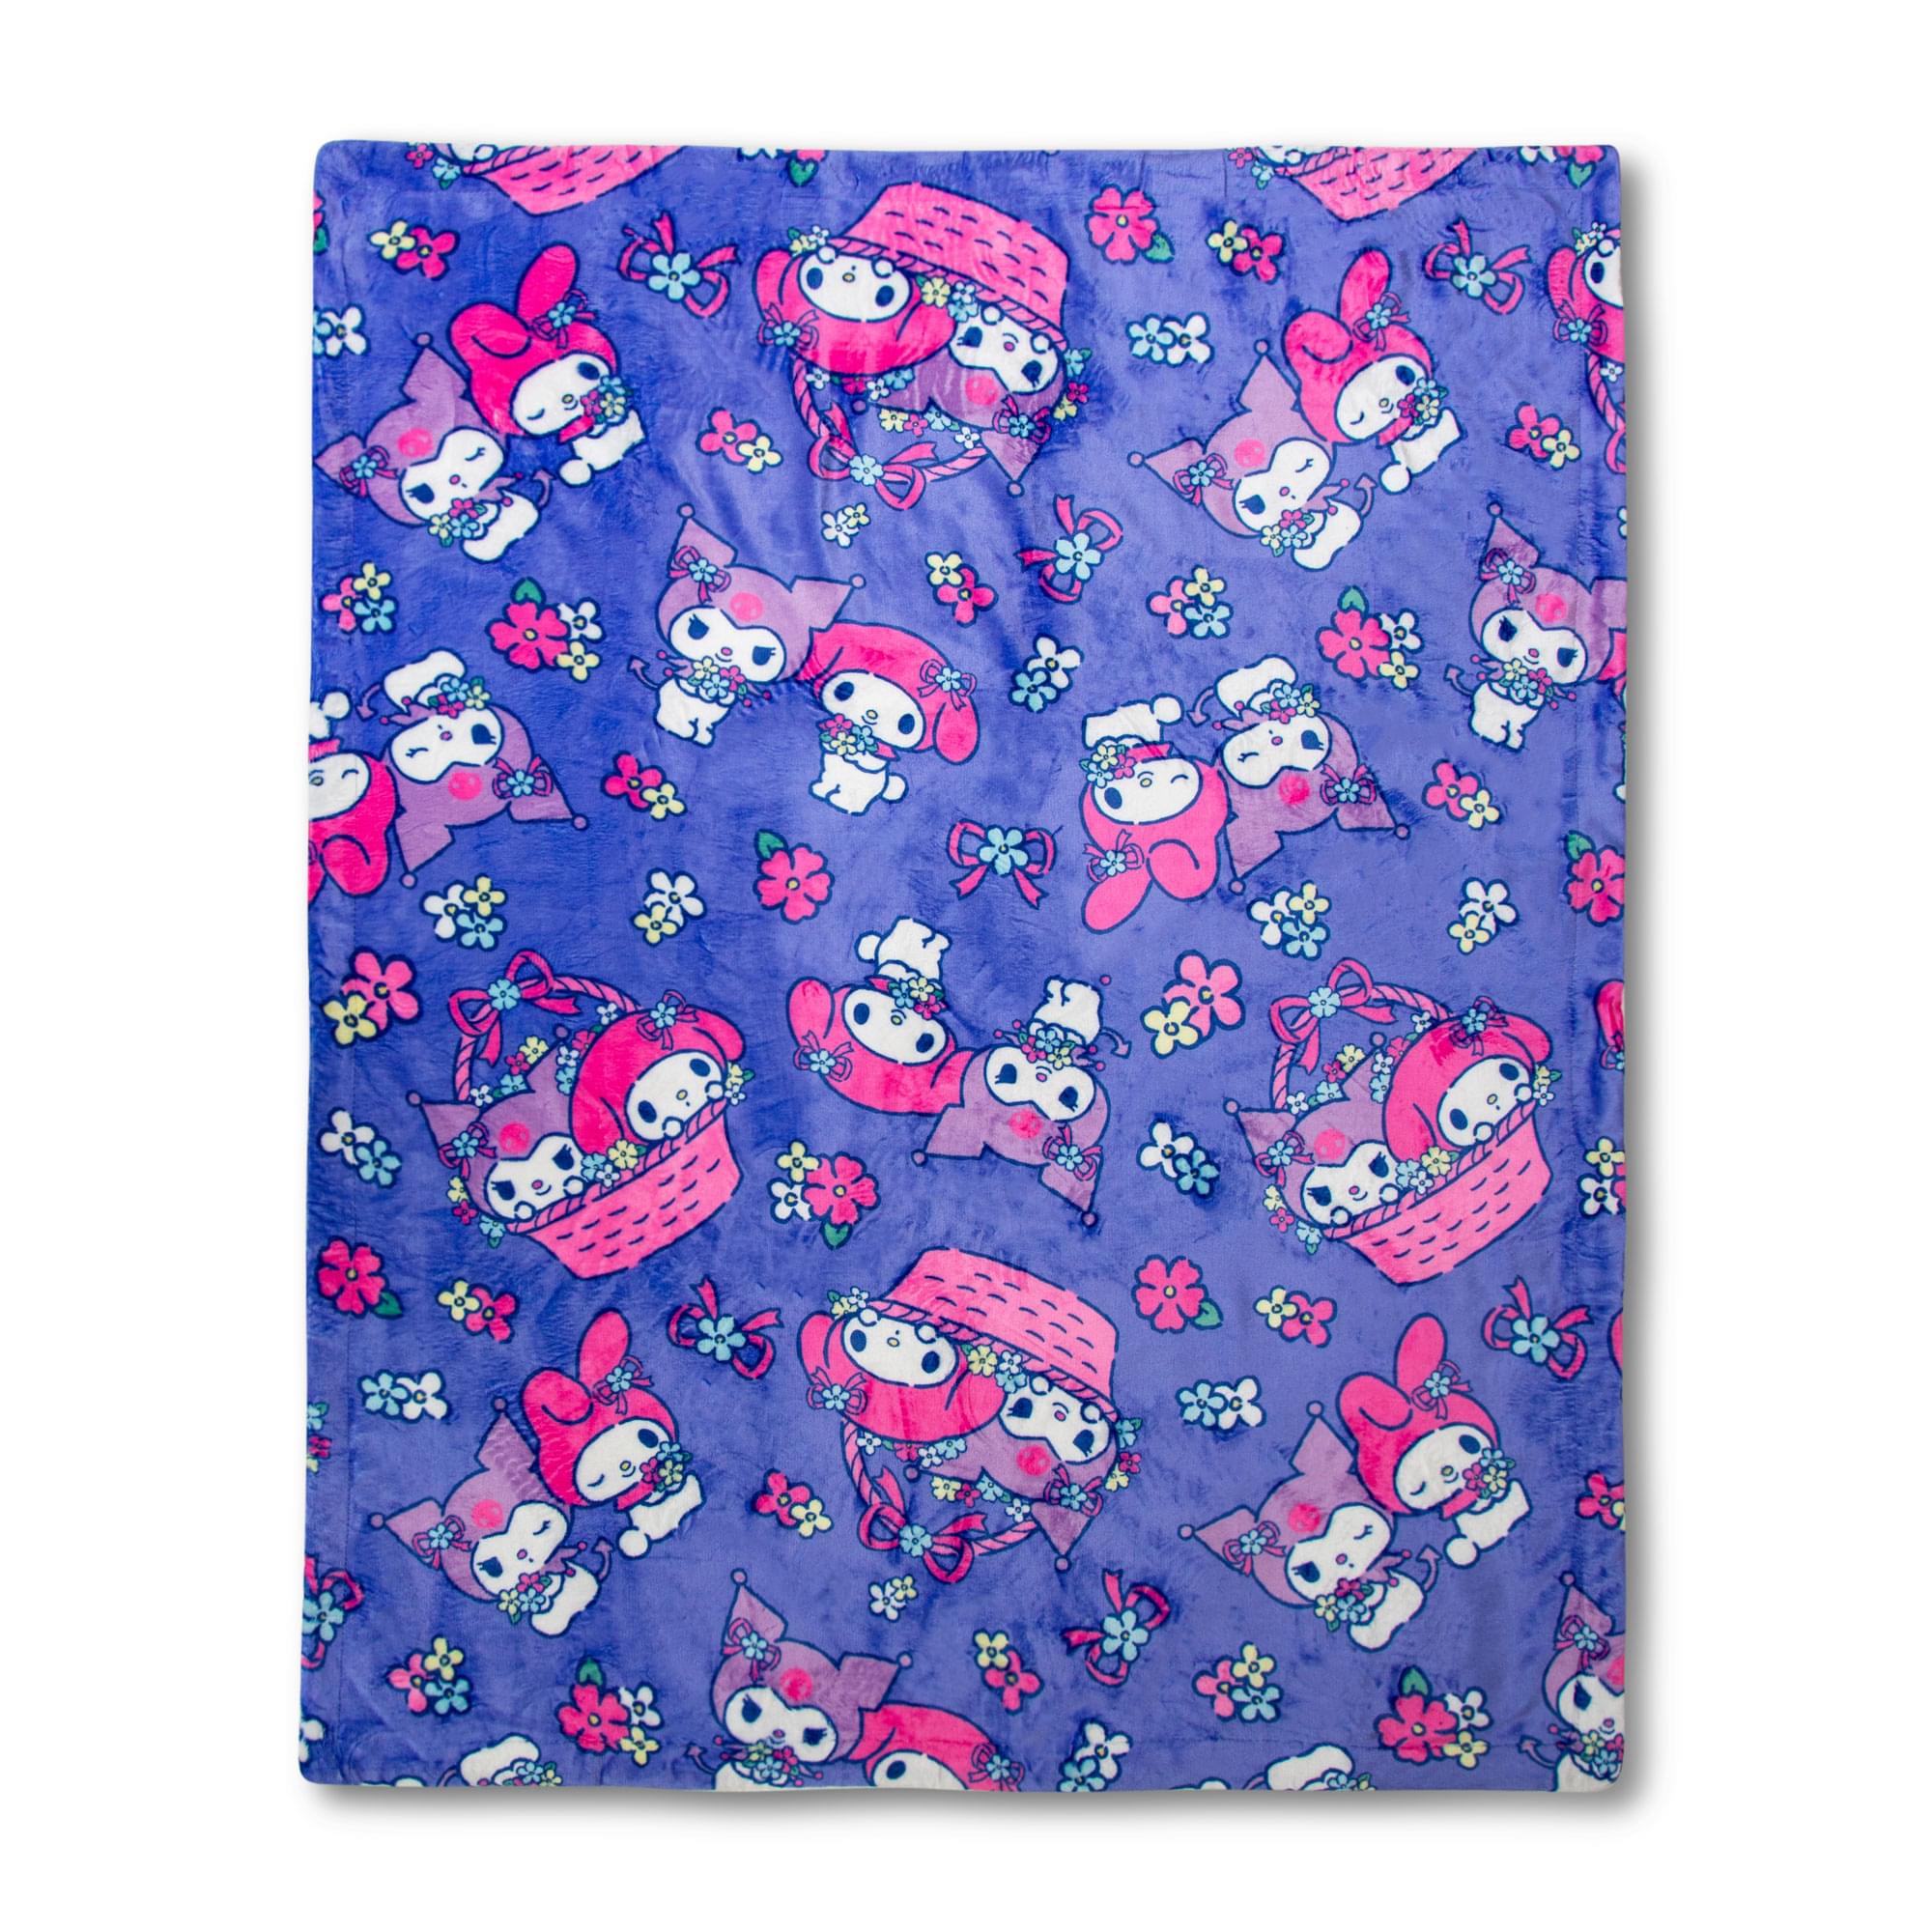 Sanrio My Melody And Kuromi Flower Baskets Sherpa Throw Blanket , 50 X 60 Inches